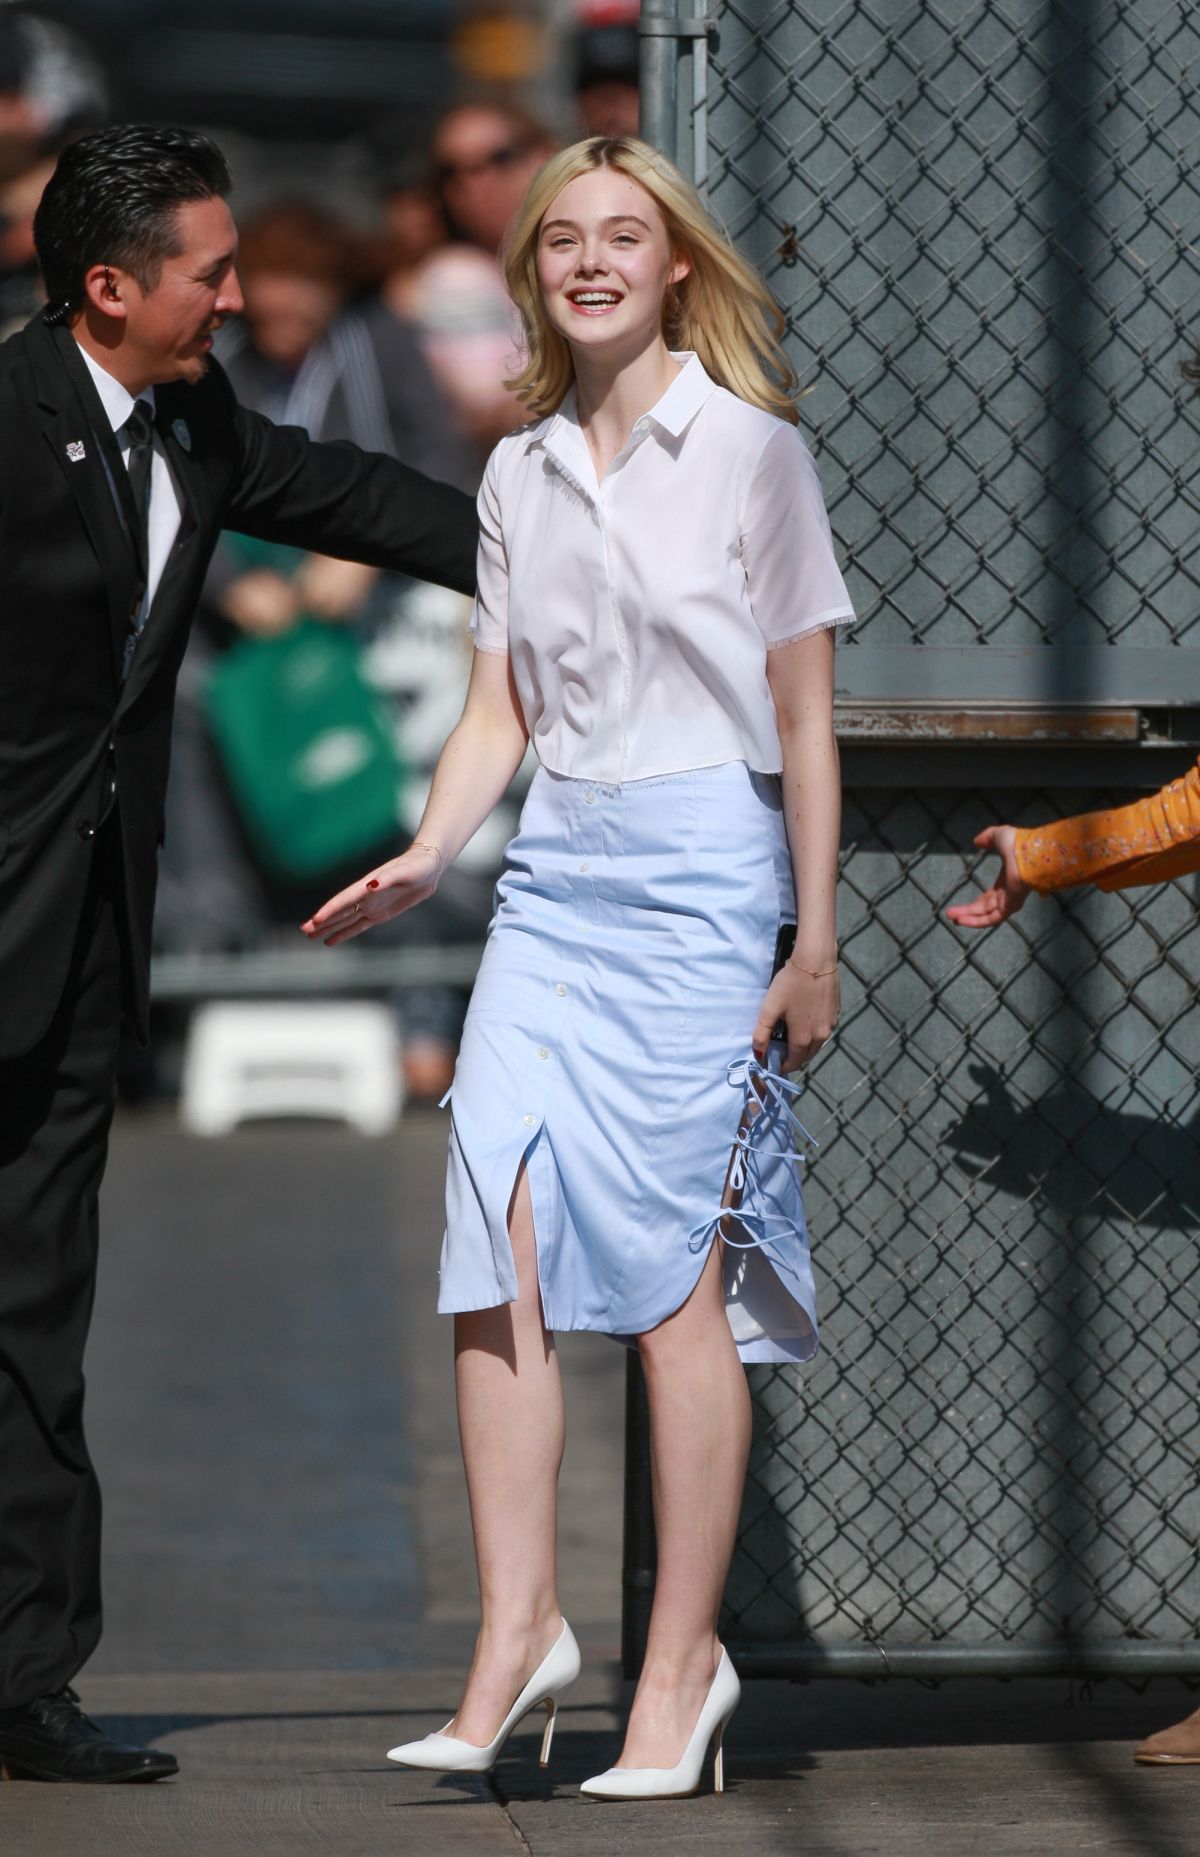 ELLE FANNING at The Jimmy Kimmel Live in Hollywood – HawtCelebs